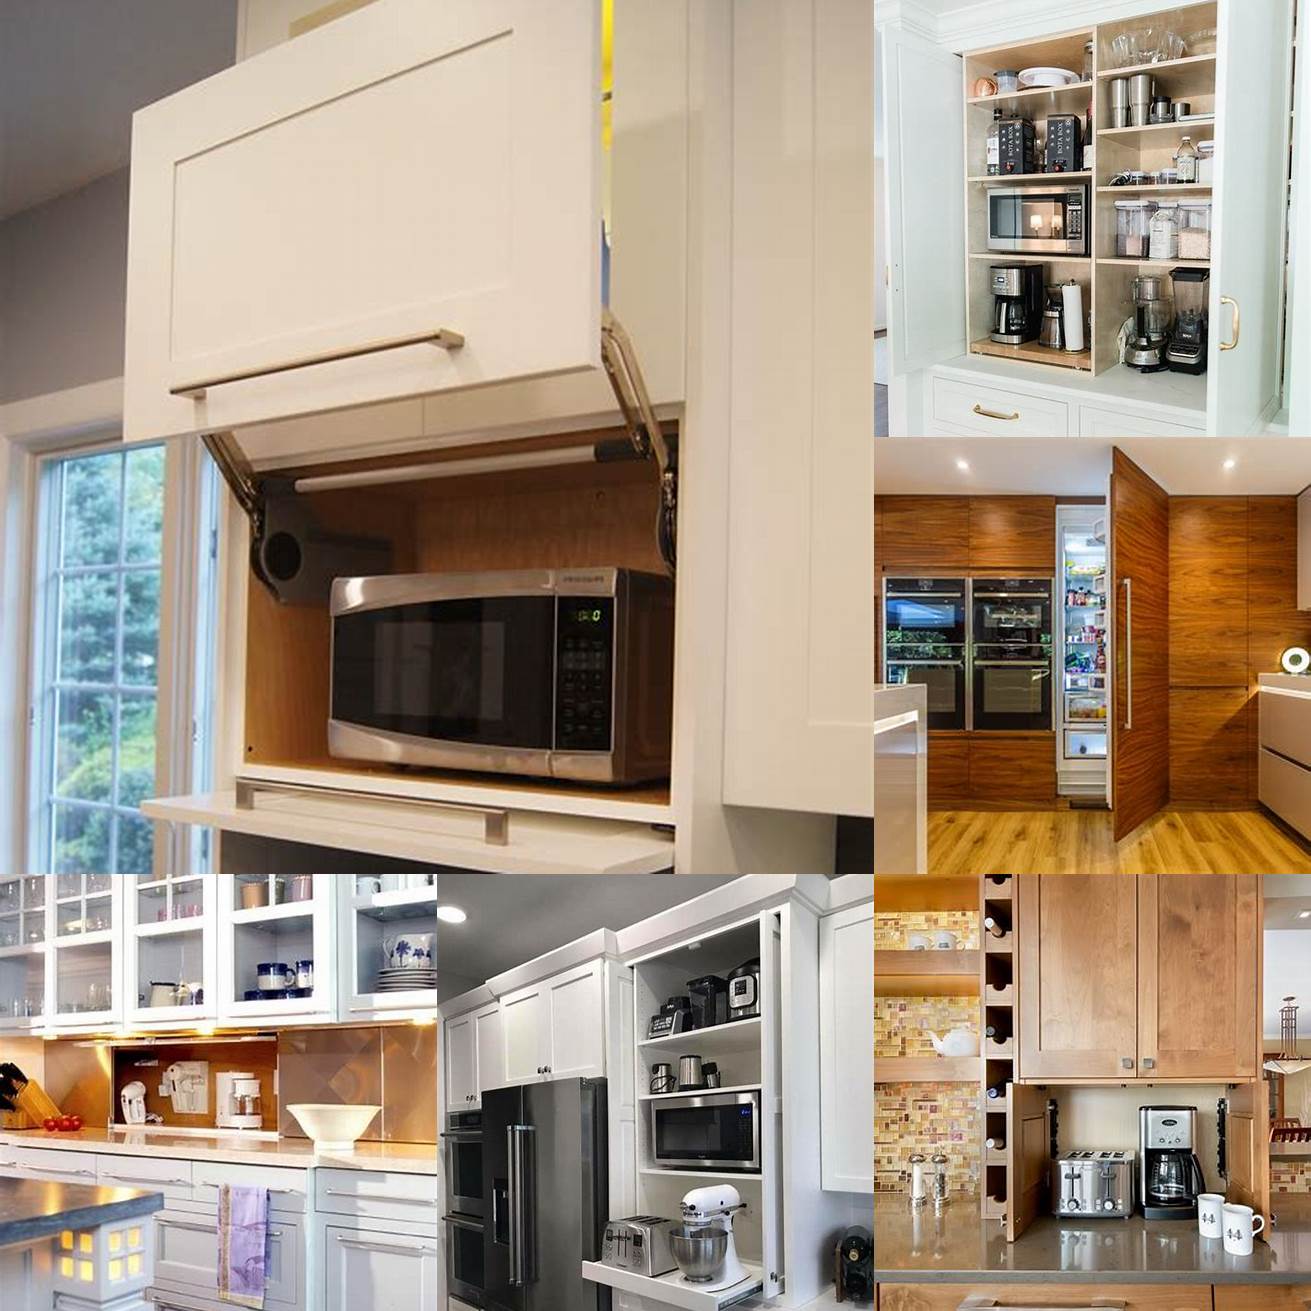 Integrated appliances and hidden storage